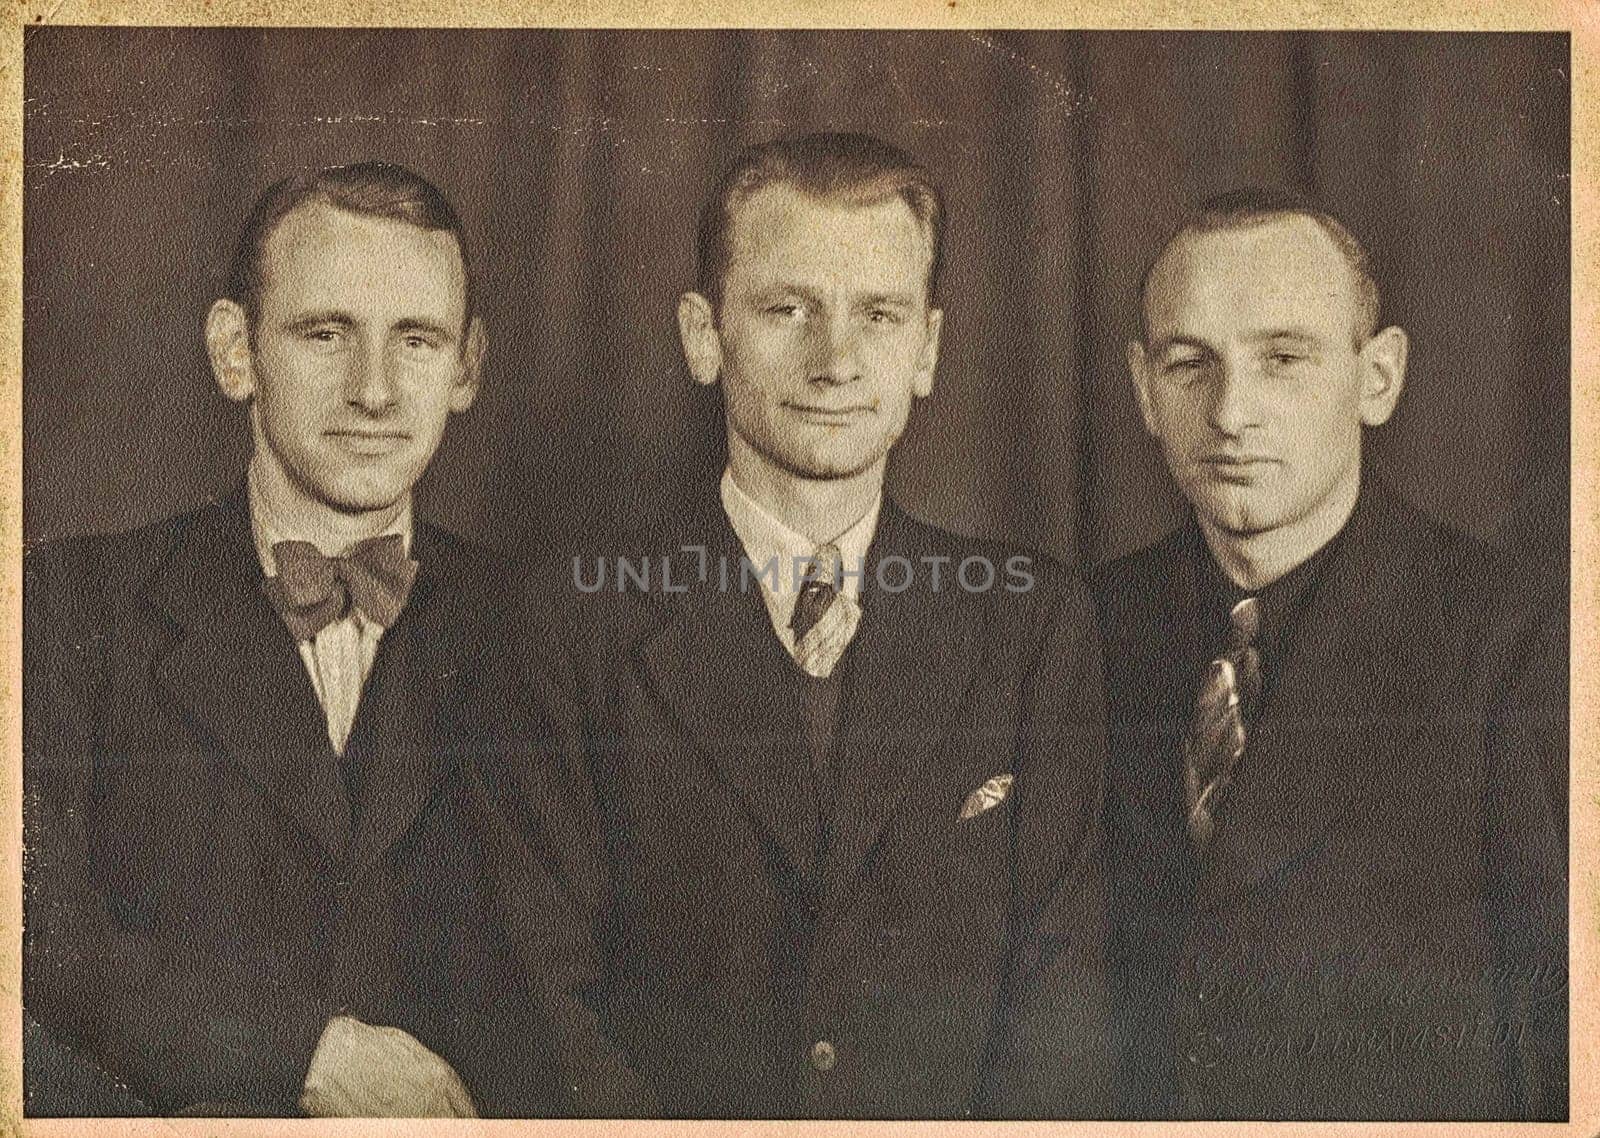 The vinage photo shows three young men. Studio black and white portra by roman_nerud